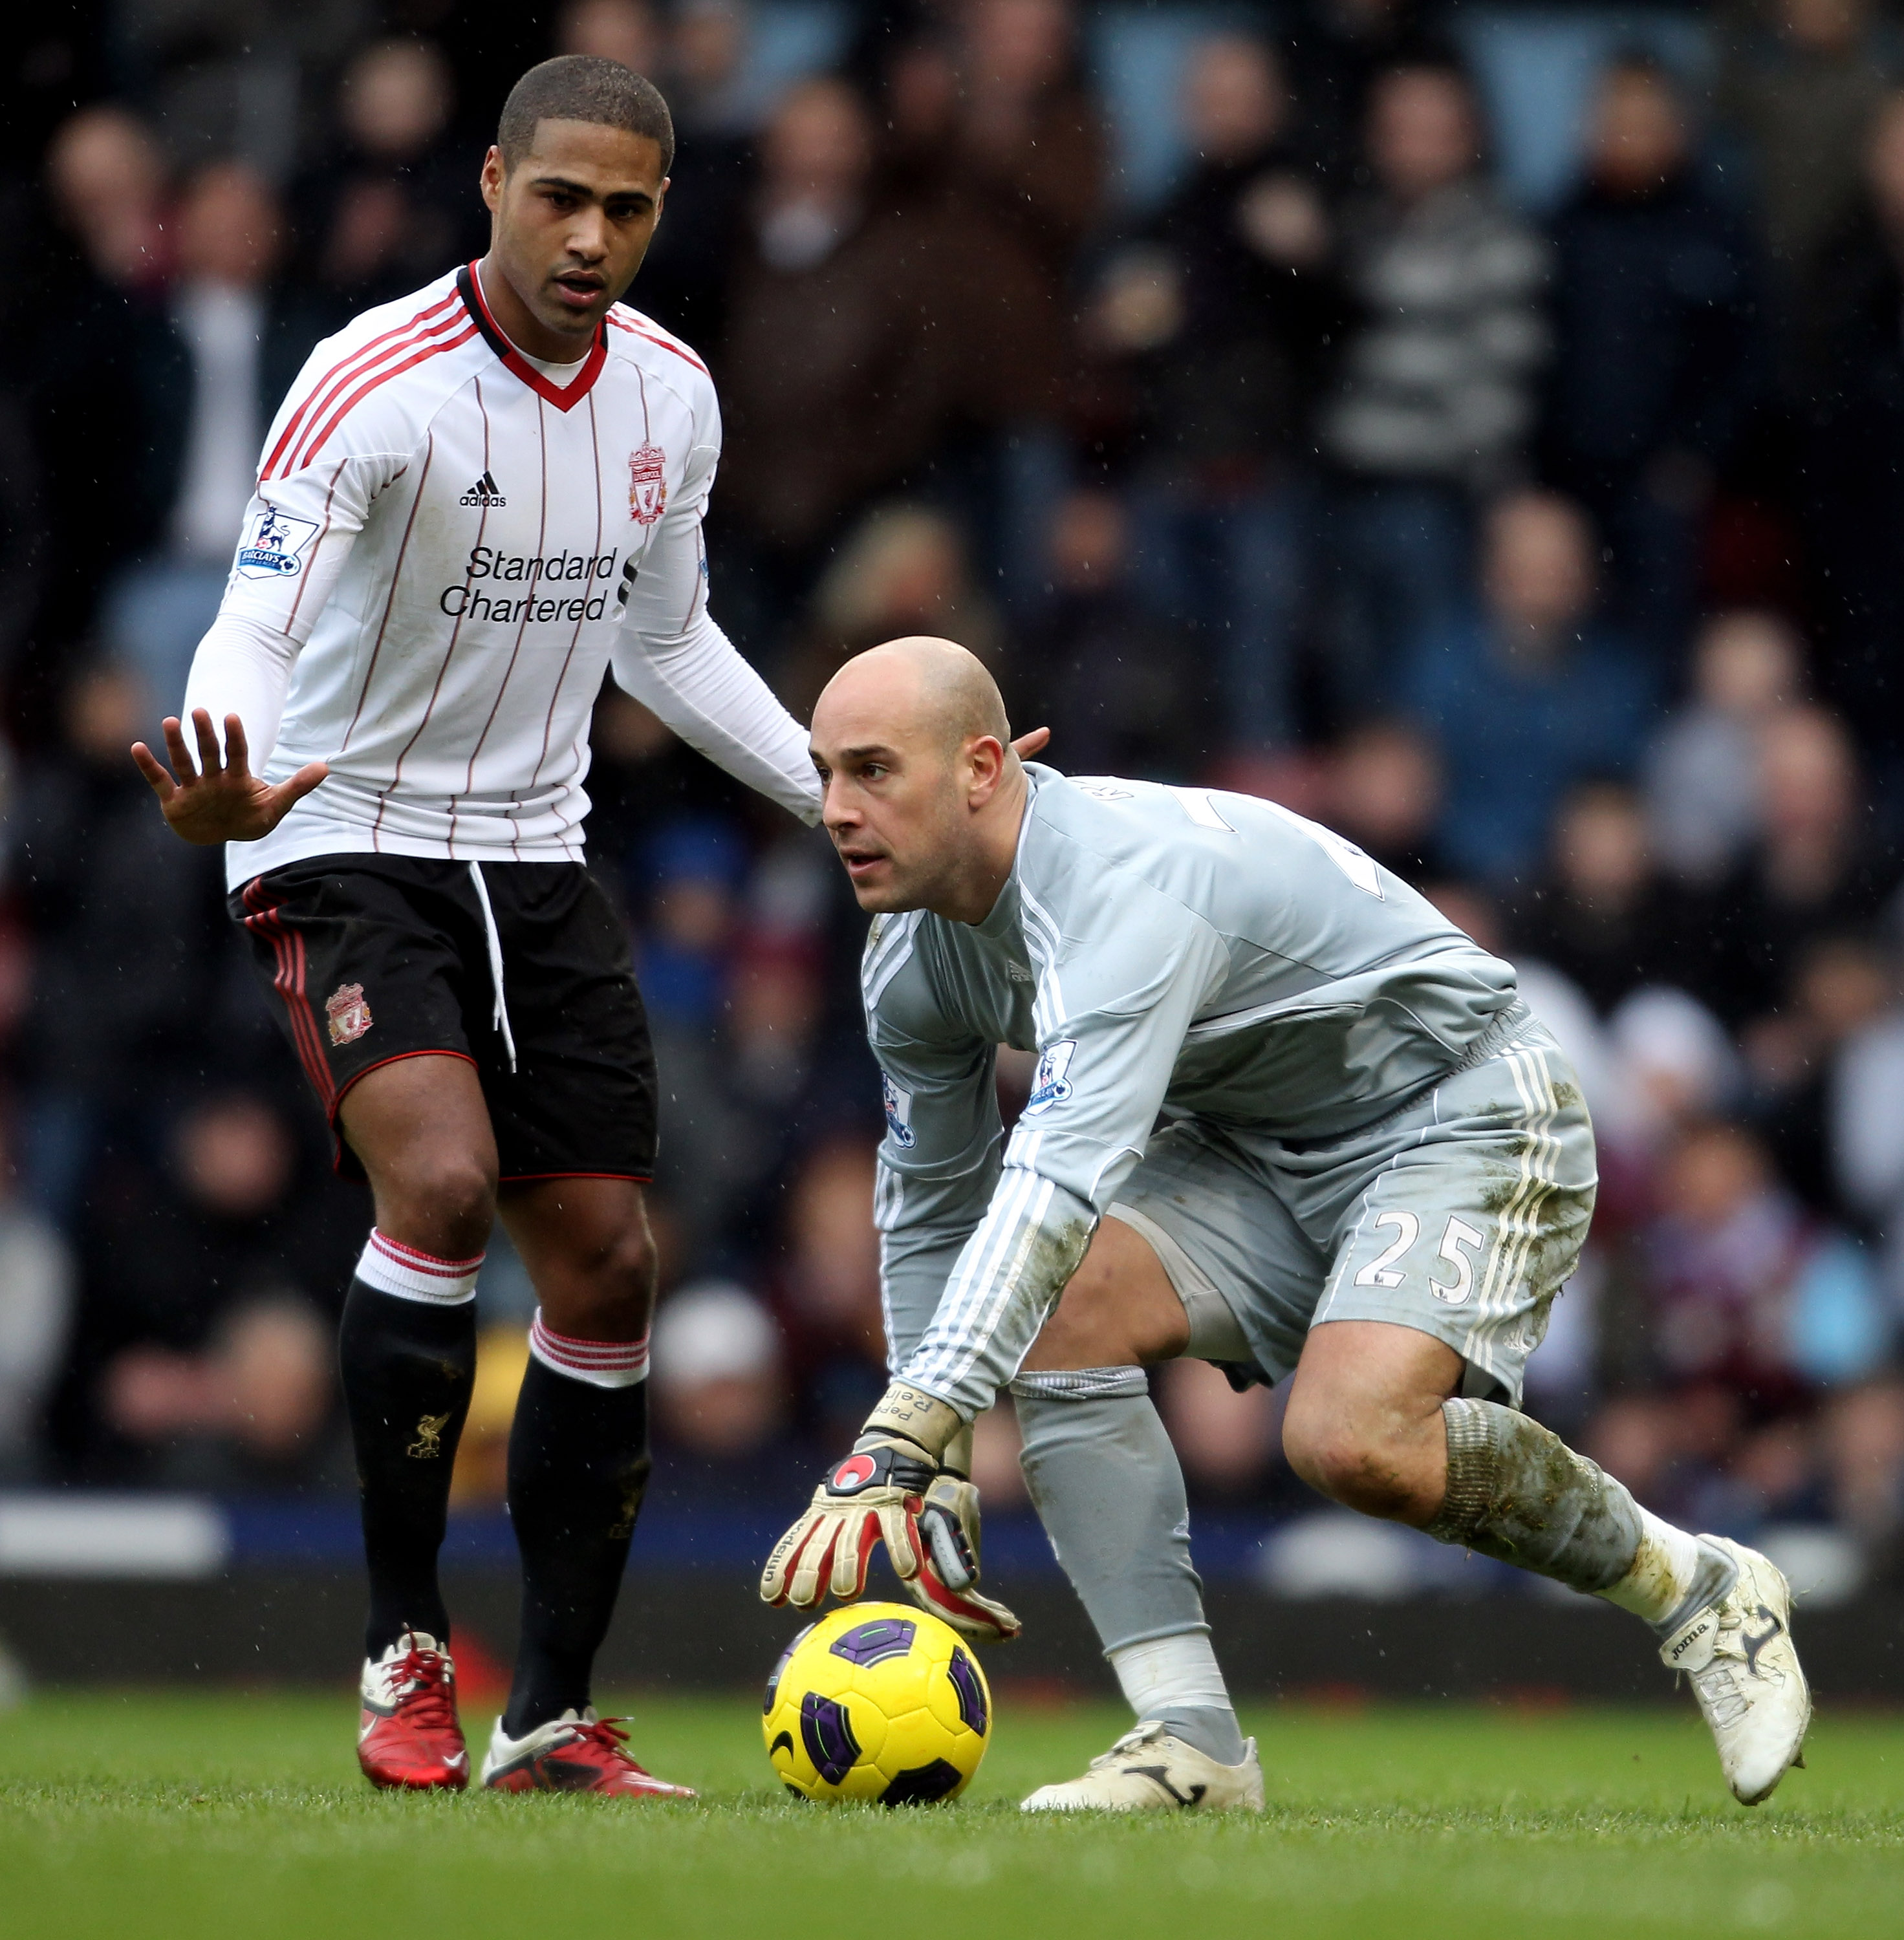 LONDON, ENGLAND - FEBRUARY 27:  Glen Johnson (L) and Pepe Reina of Liverpool in action during the Barclays Premier League match between West Ham United and Liverpool at the Boleyn Ground on February 27, 2011 in London, England.  (Photo by Scott Heavey/Get